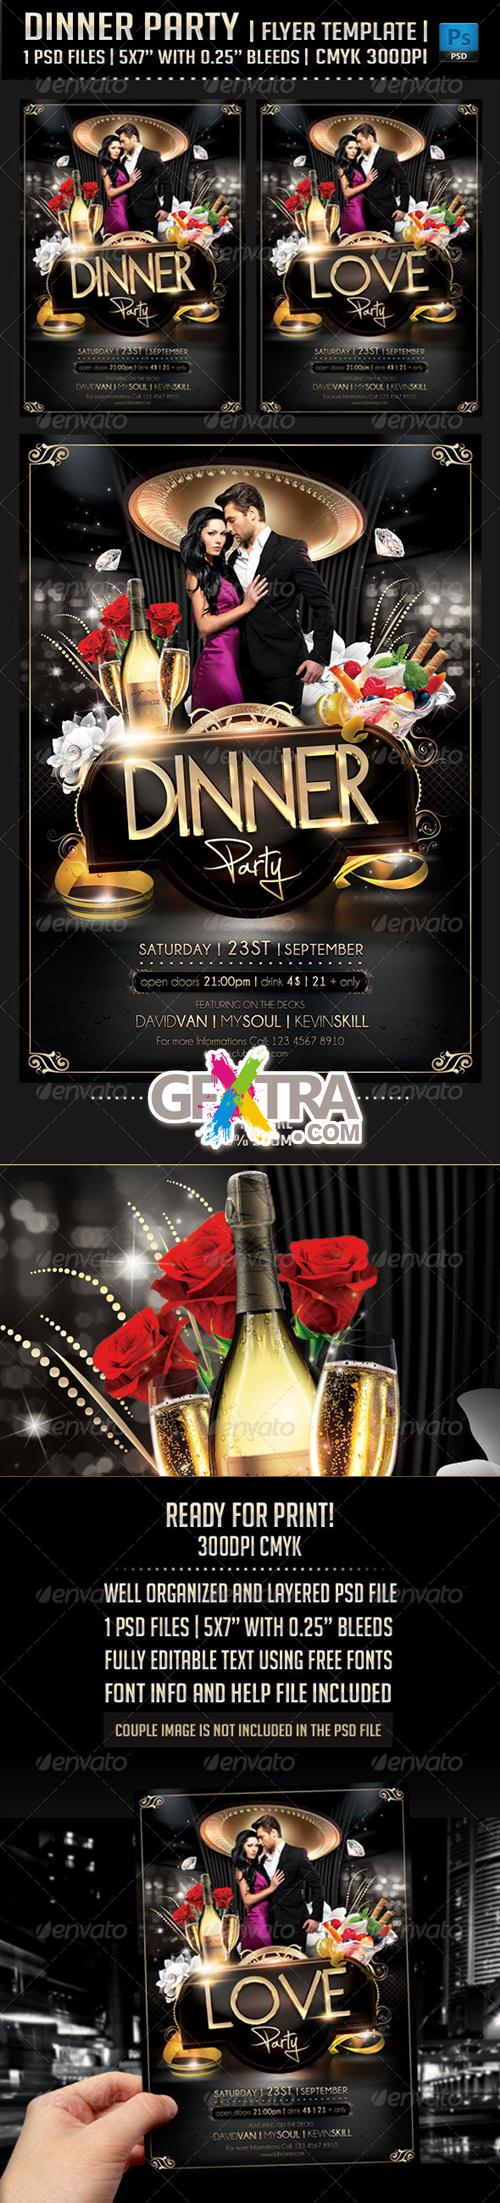 GraphicRiver - Dinner Party Flyer Template